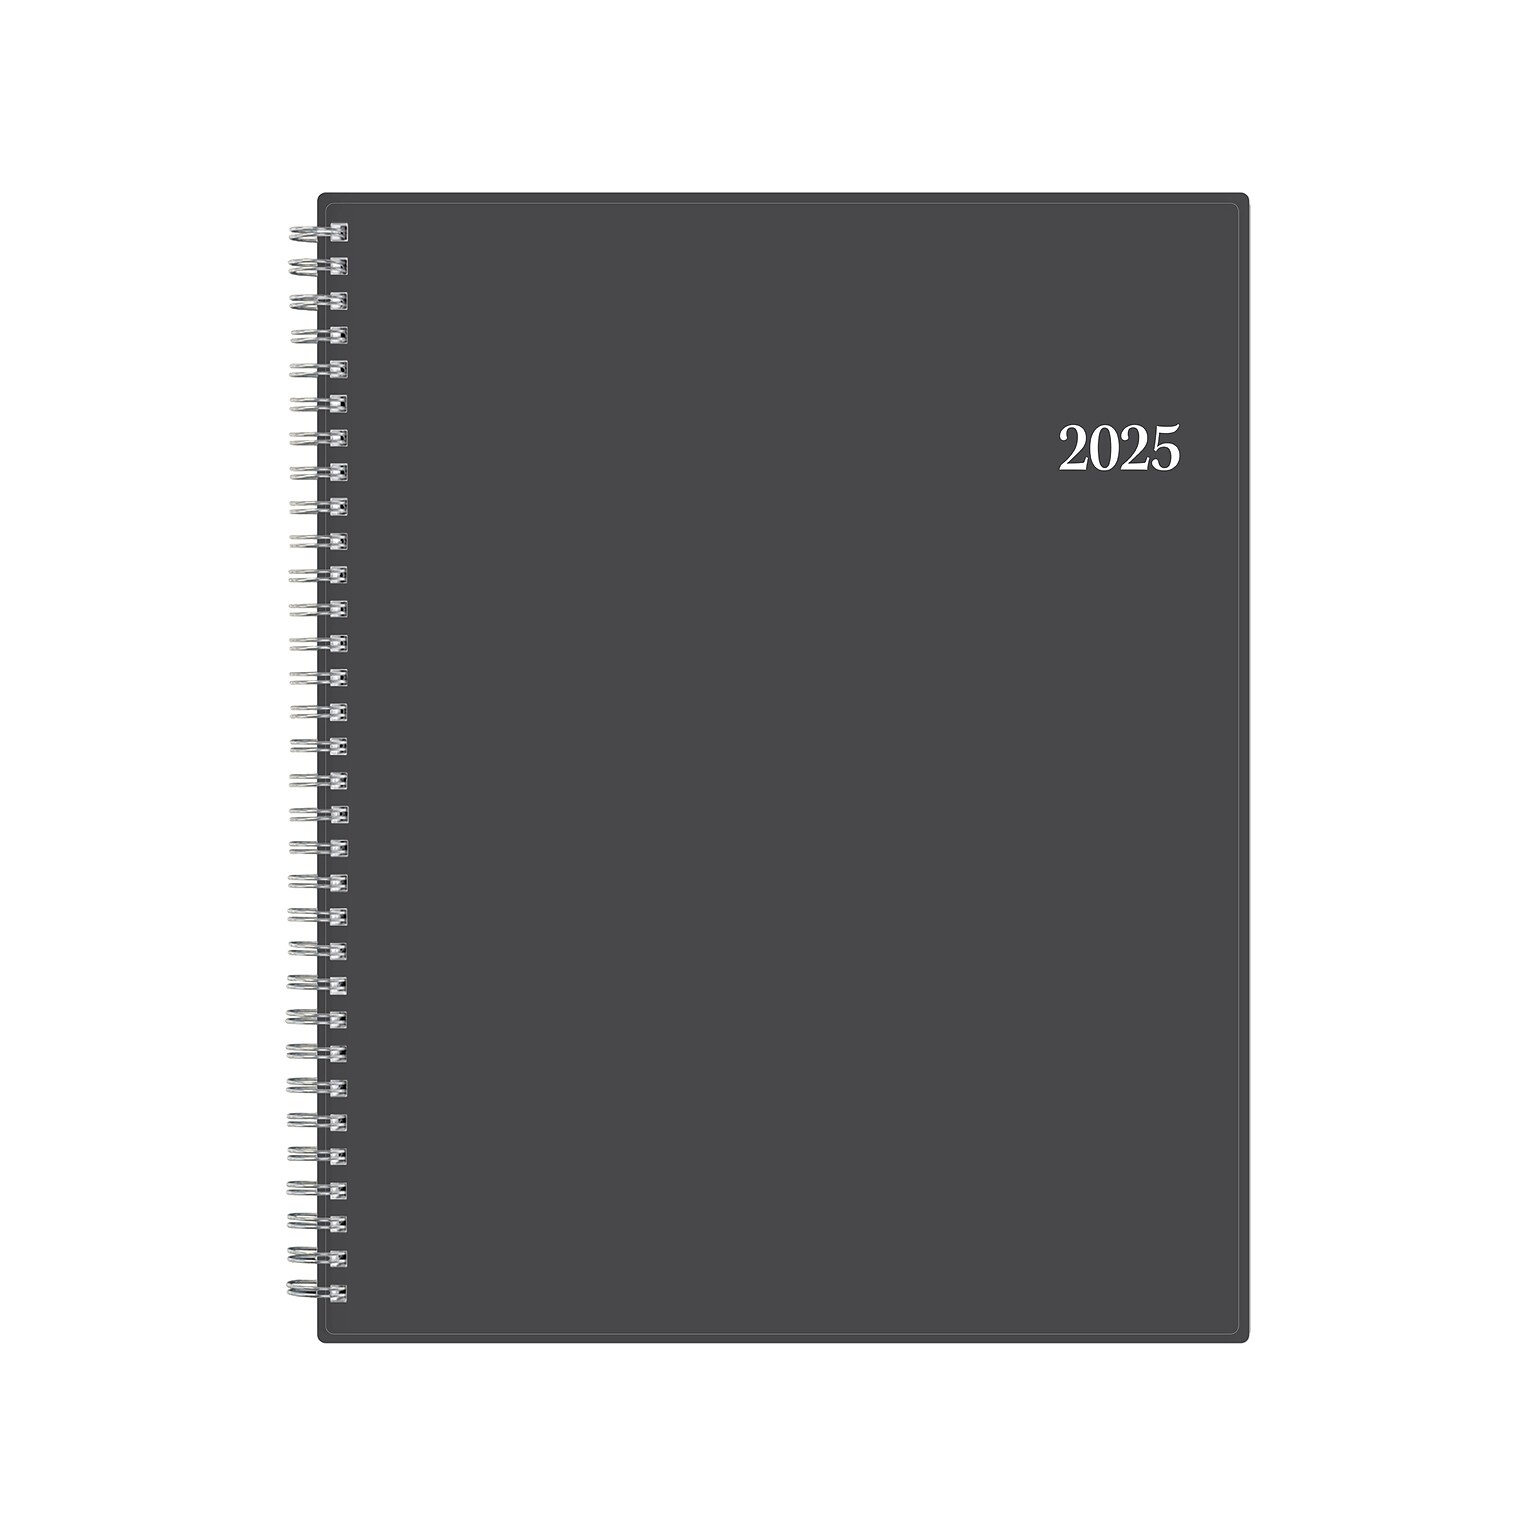 2025 Blue Sky Passages 8.5 x 11 Weekly & Monthly Planner, Plastic Cover, Charcoal Gray (100008-25)